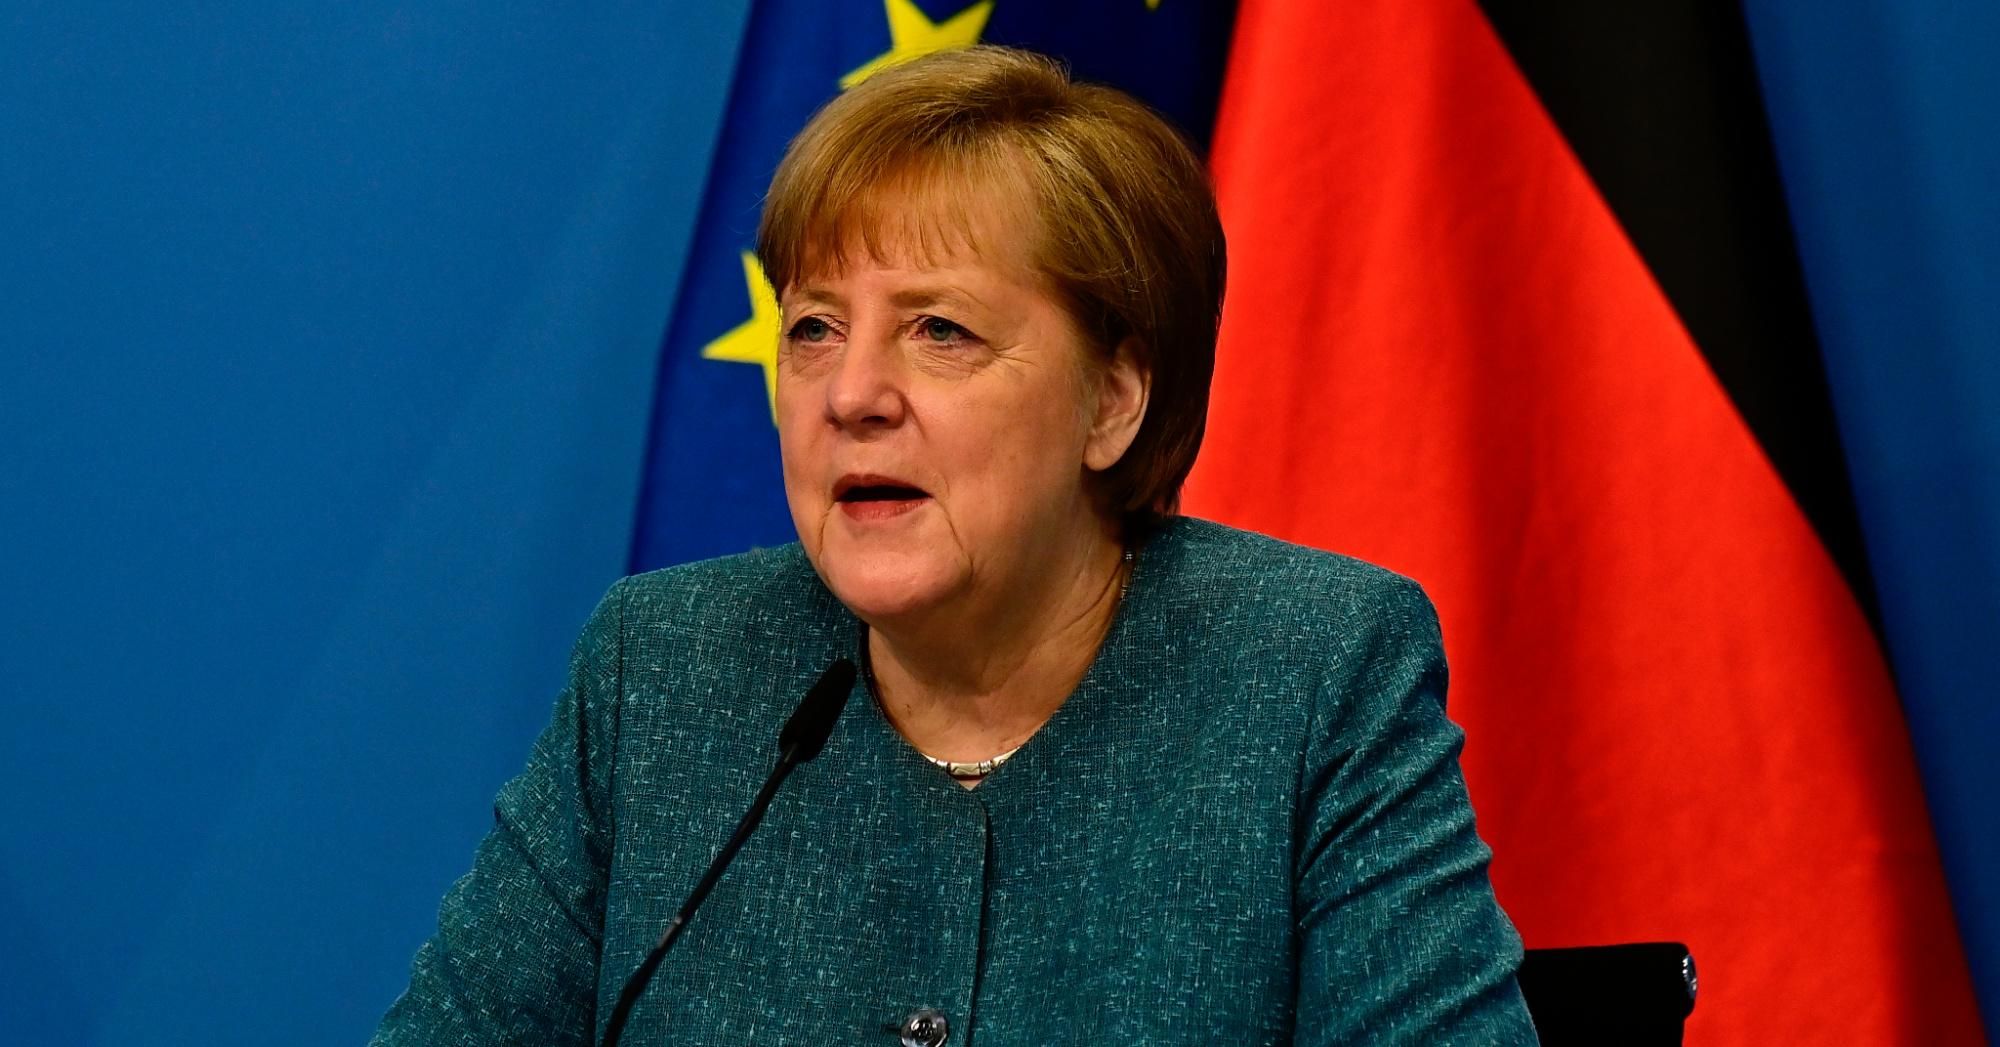 German Chancellor Angela Merkel attends a digital discussion at the Chancellery in Berlin on May 7, 2021.